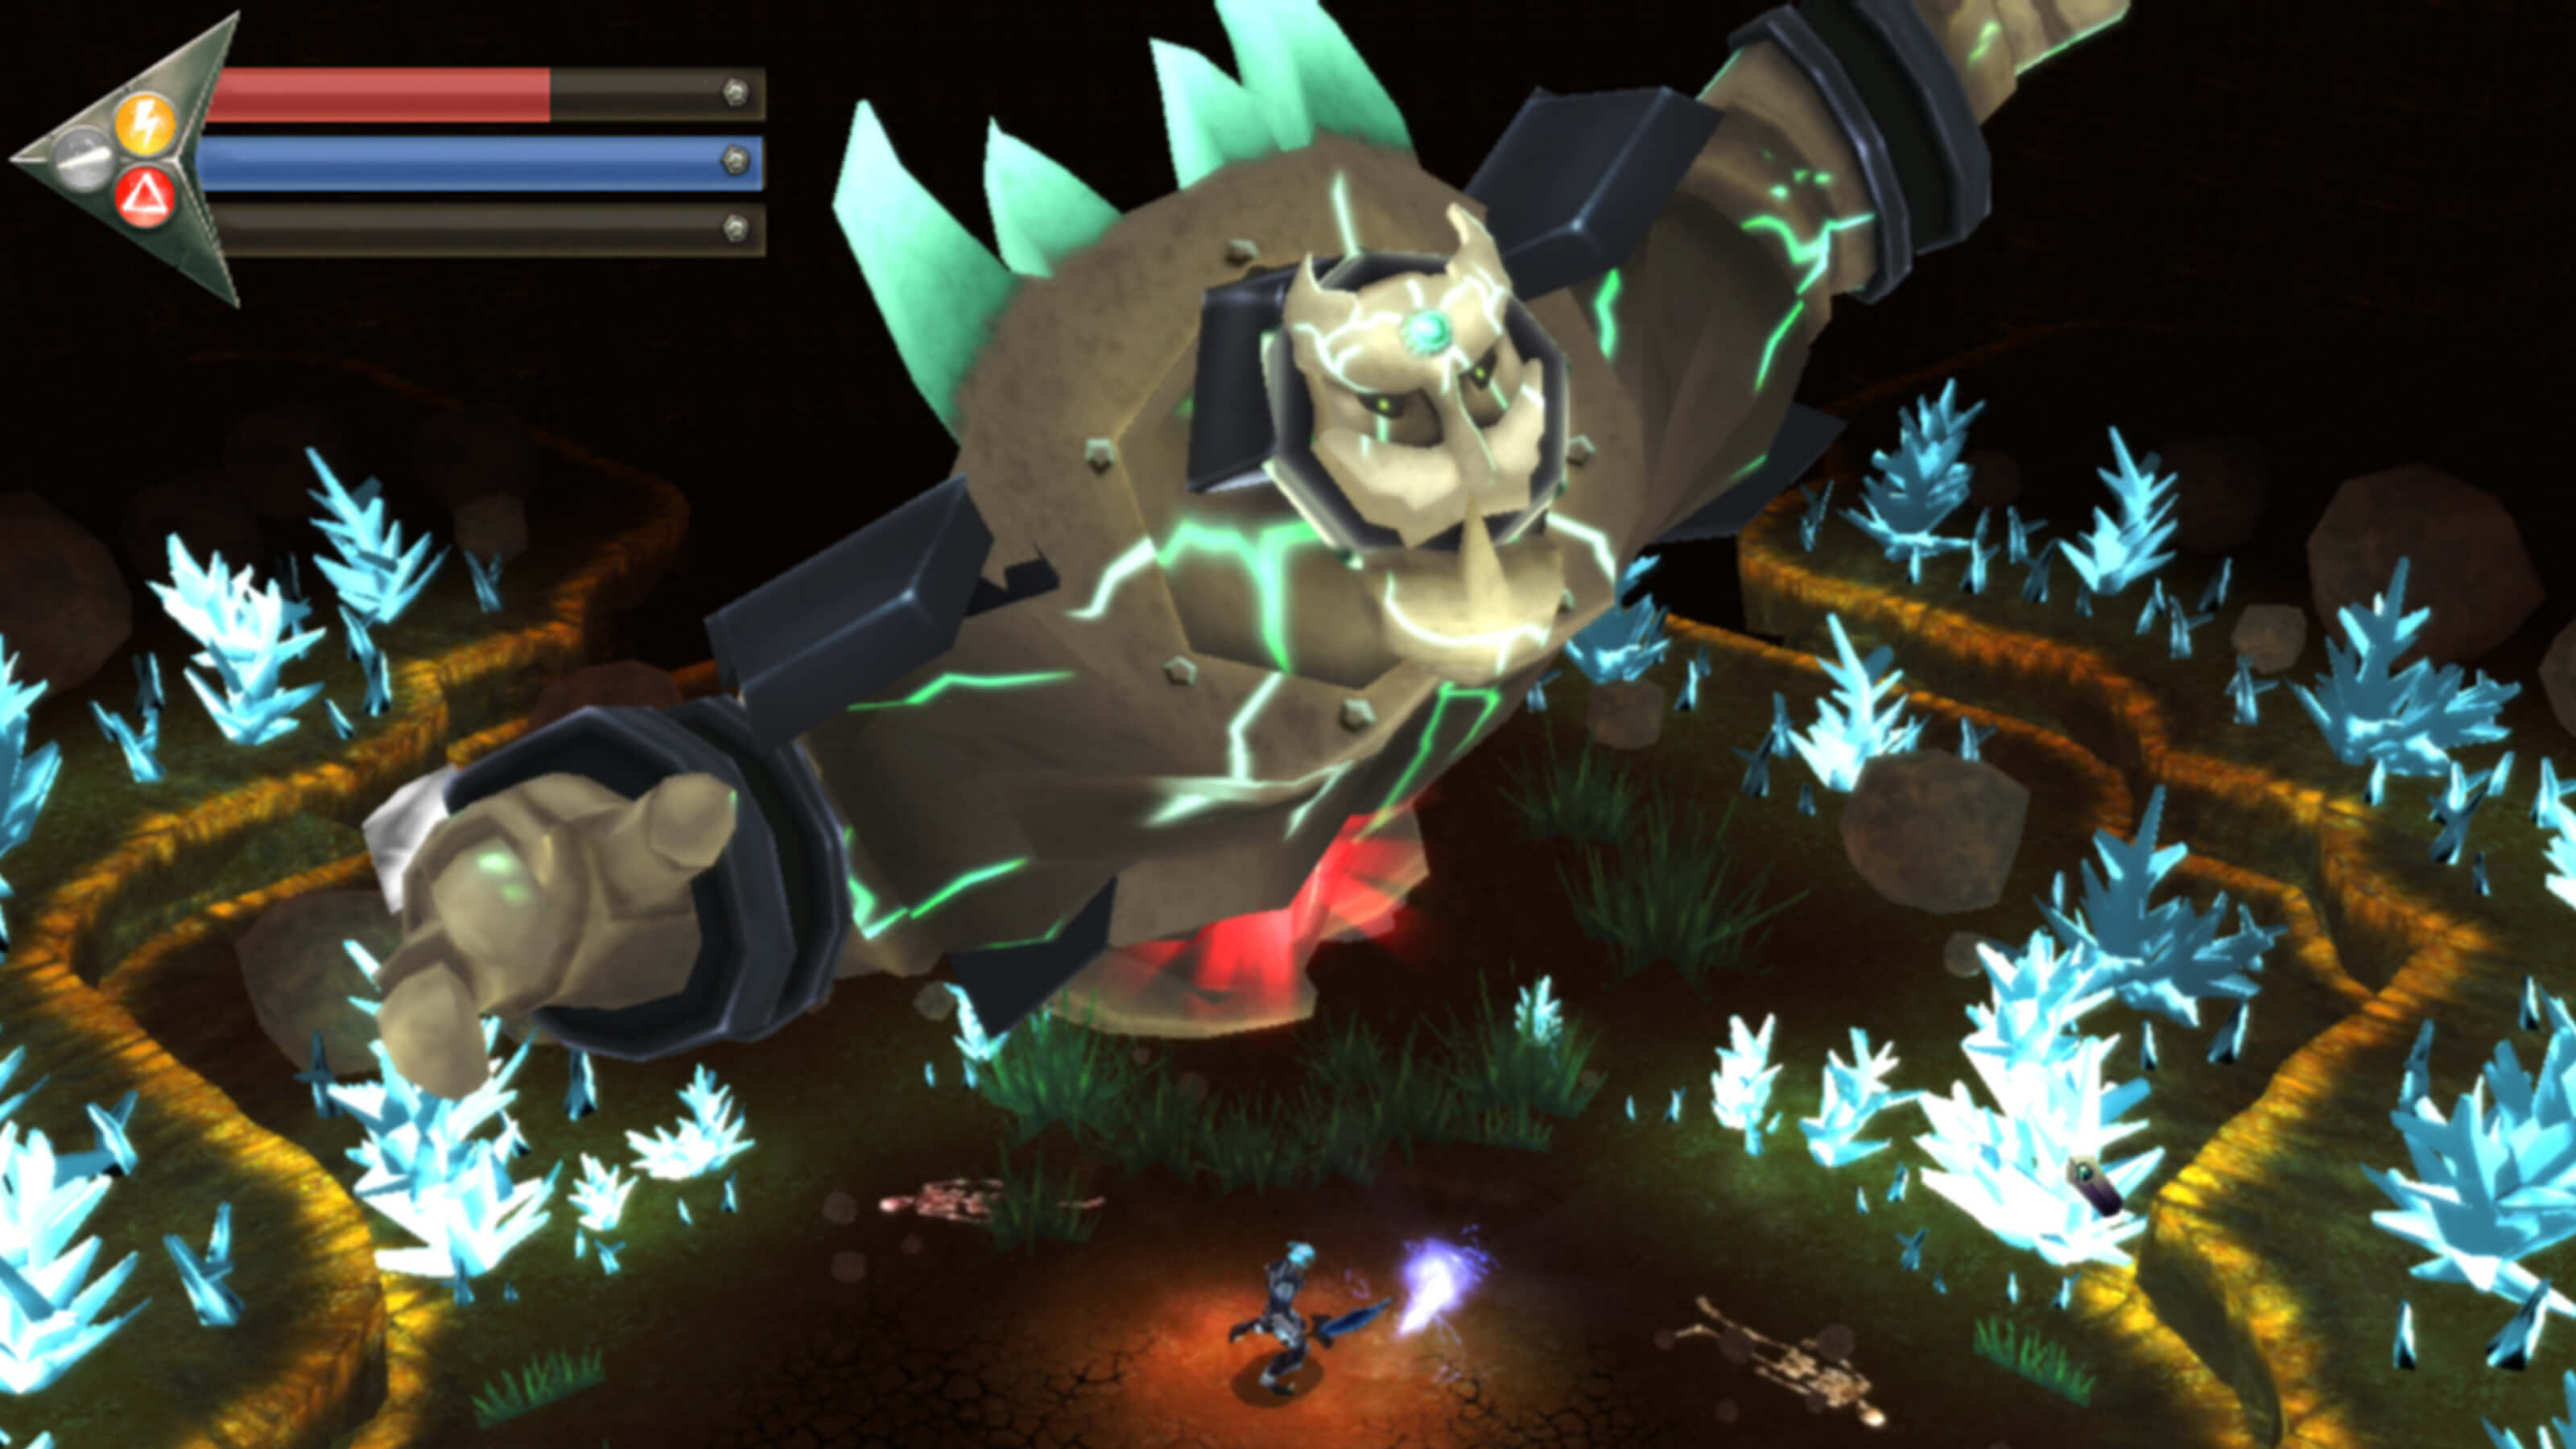 A large, masked metal boss erupts from the ground covered in green crystals and lightning streaks